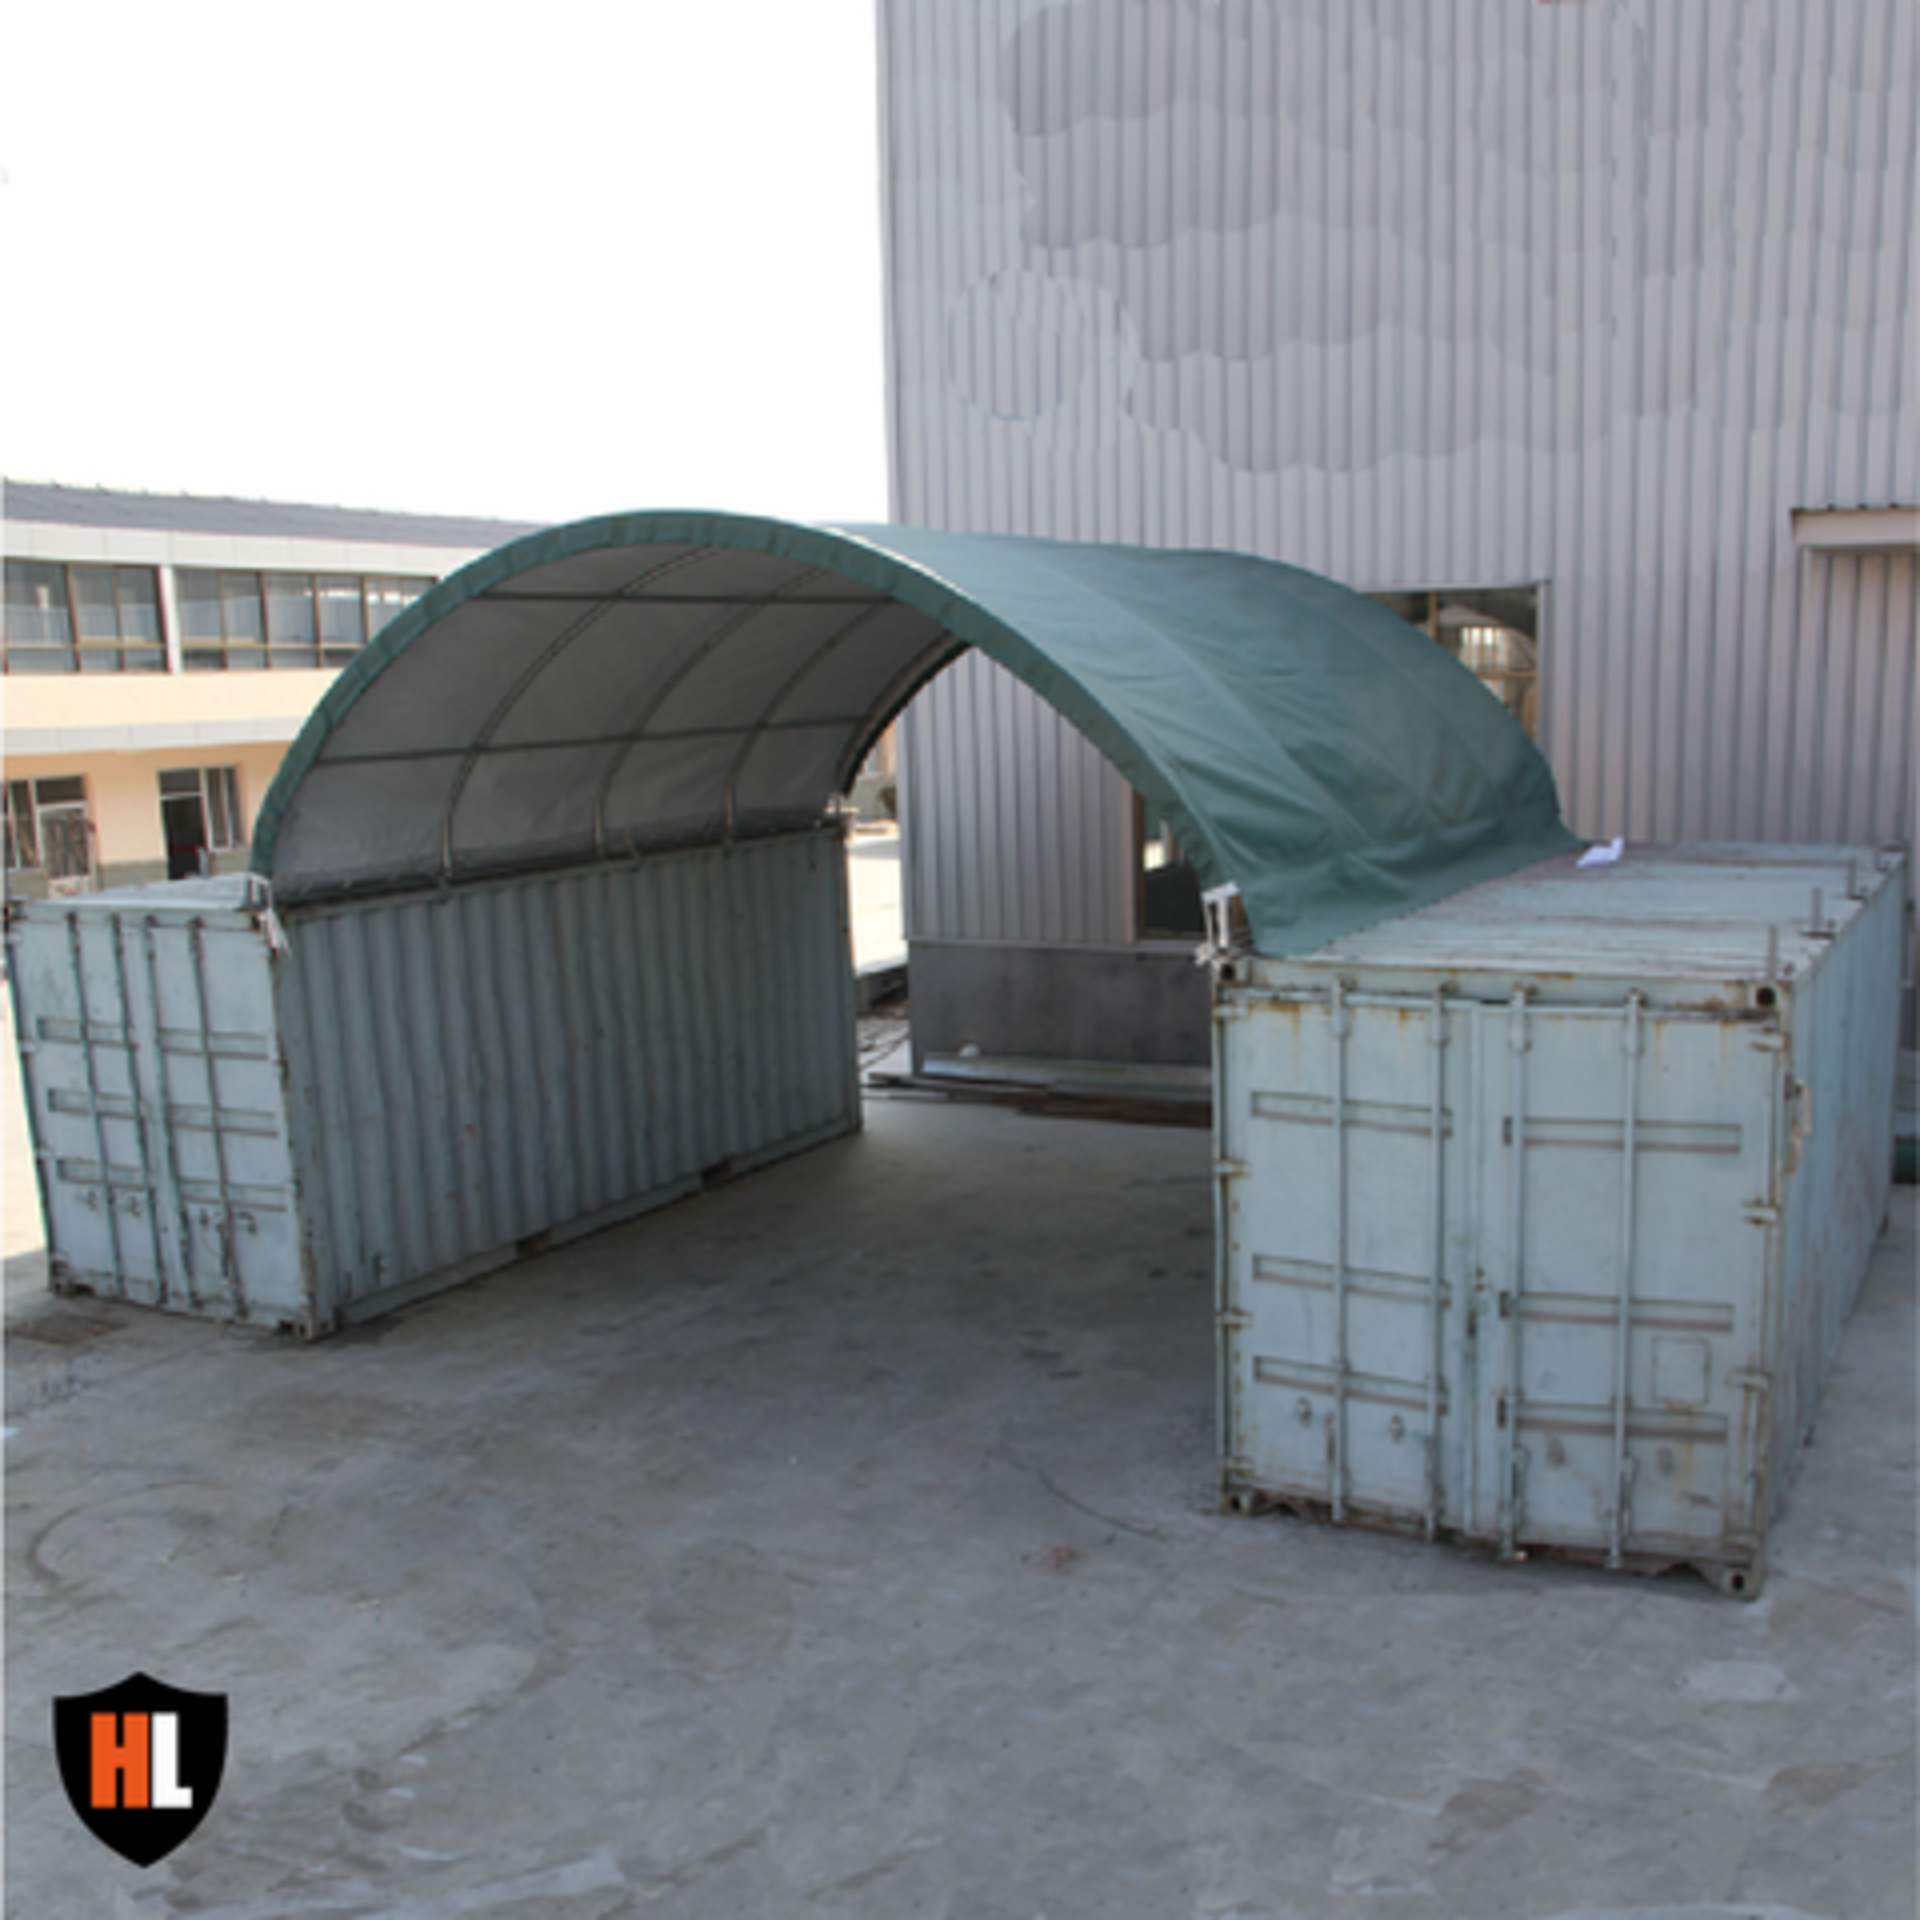 Container Shelter 20'W x 20'L x 6'6" H P/No C2020 - Image 5 of 5